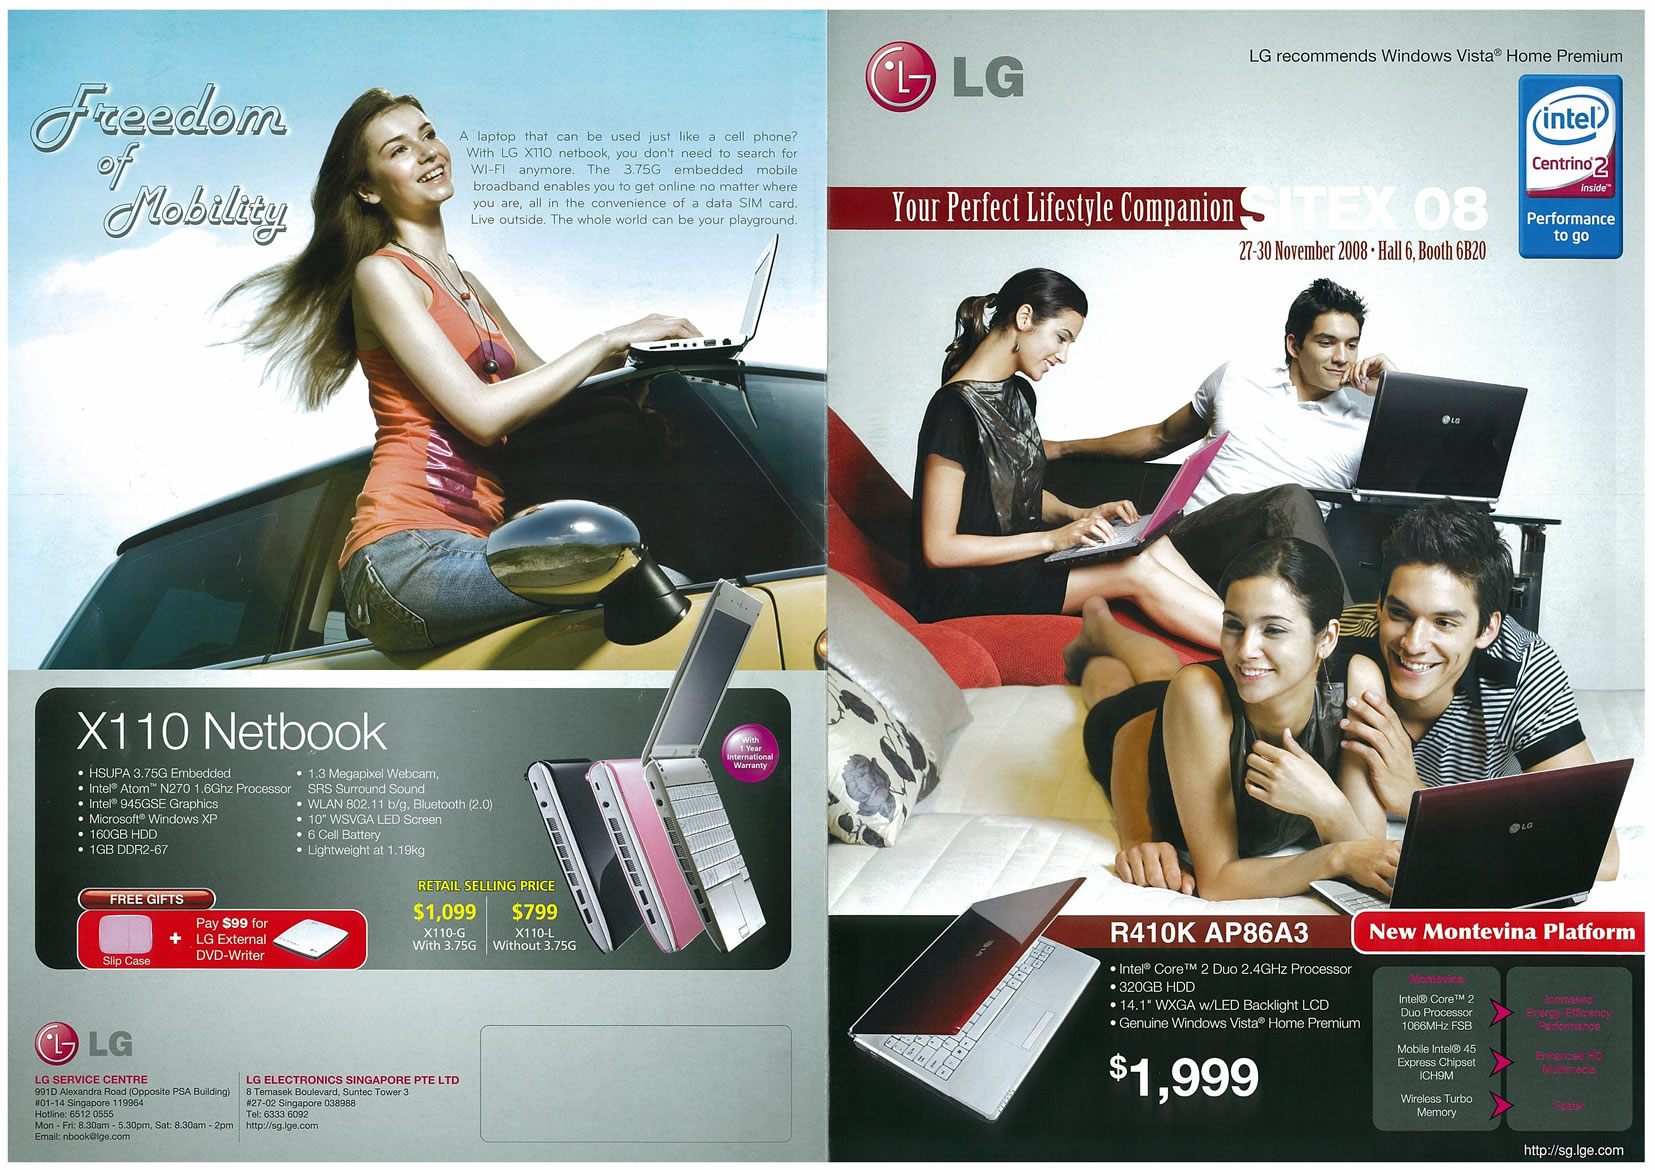 Sitex 2008 price list image brochure of LG Notebooks 01 Page 1 - Vr-zone Tclong